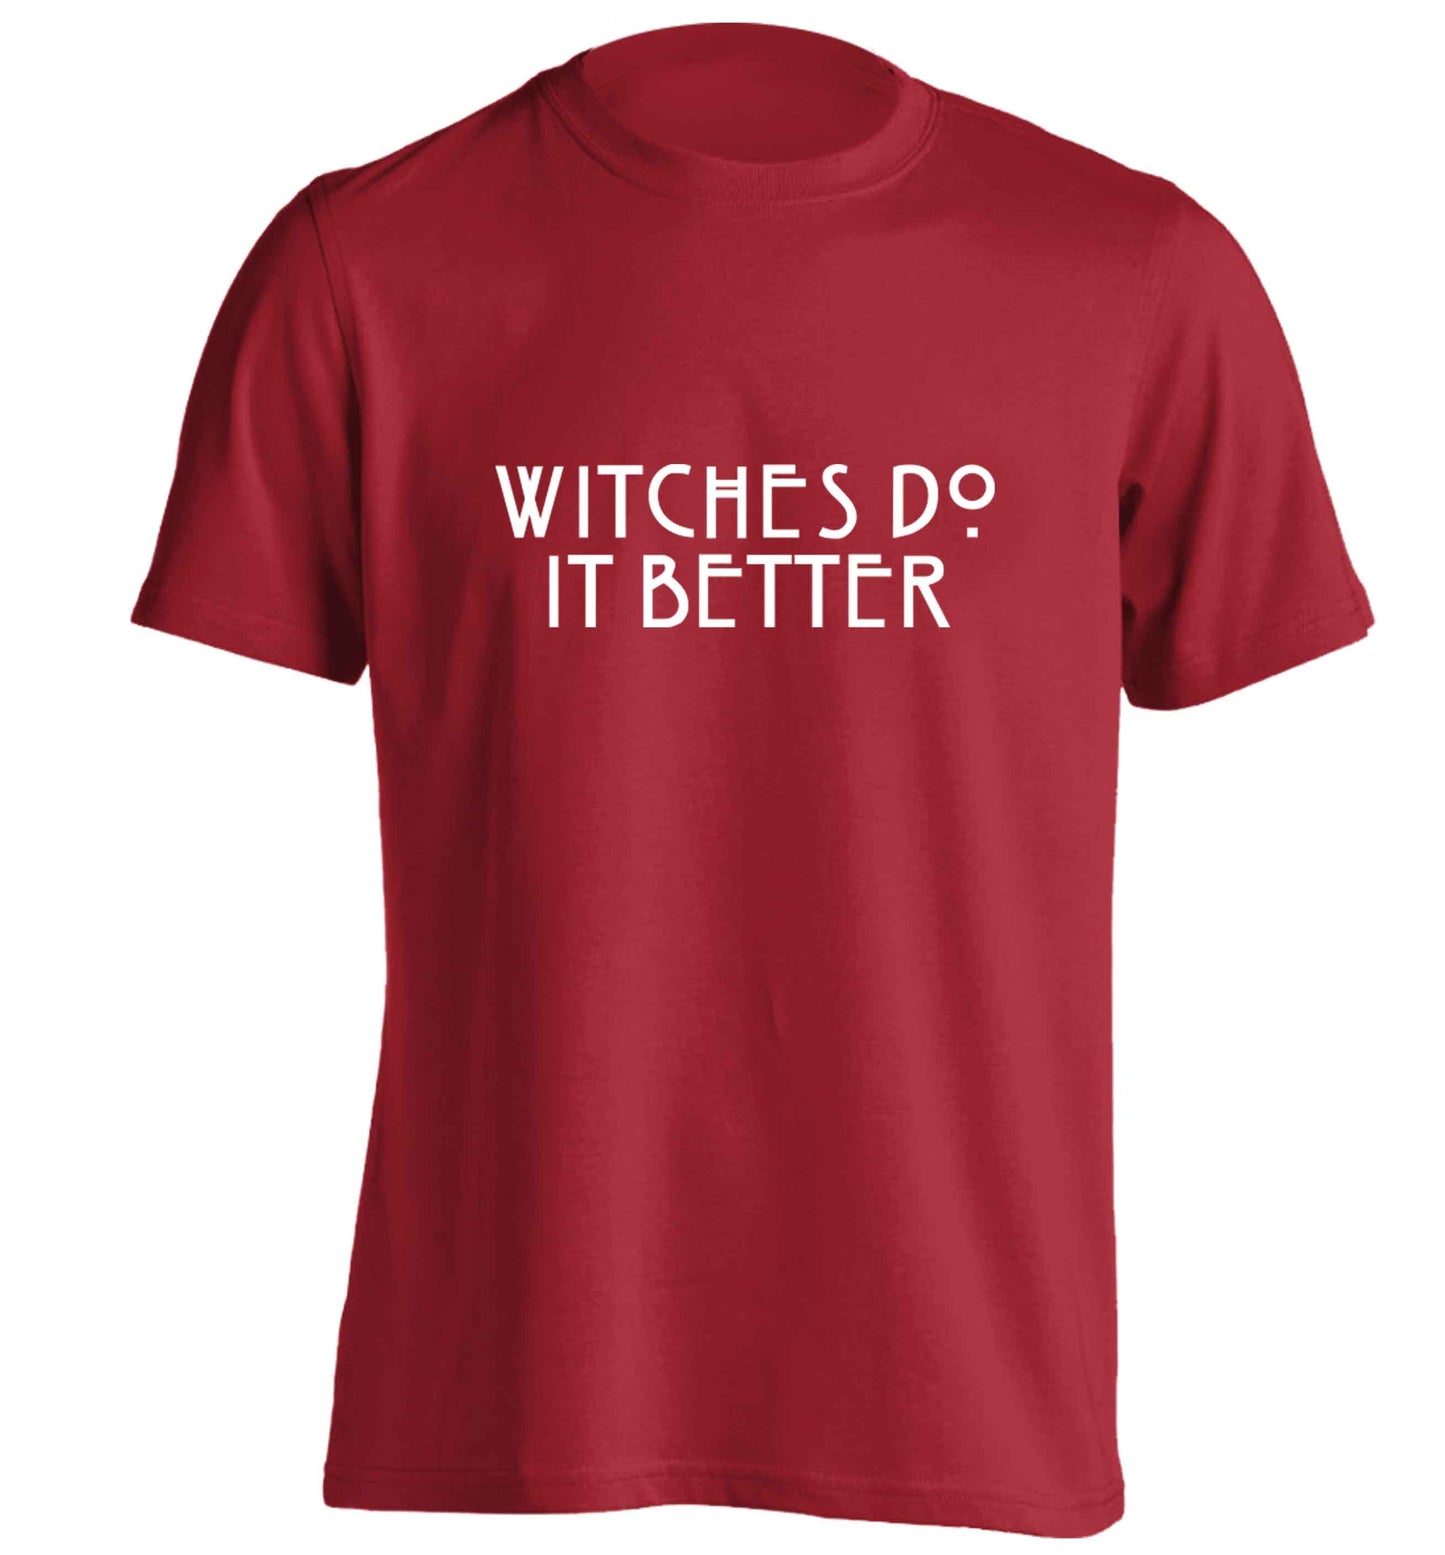 Witches do it better adults unisex red Tshirt 2XL